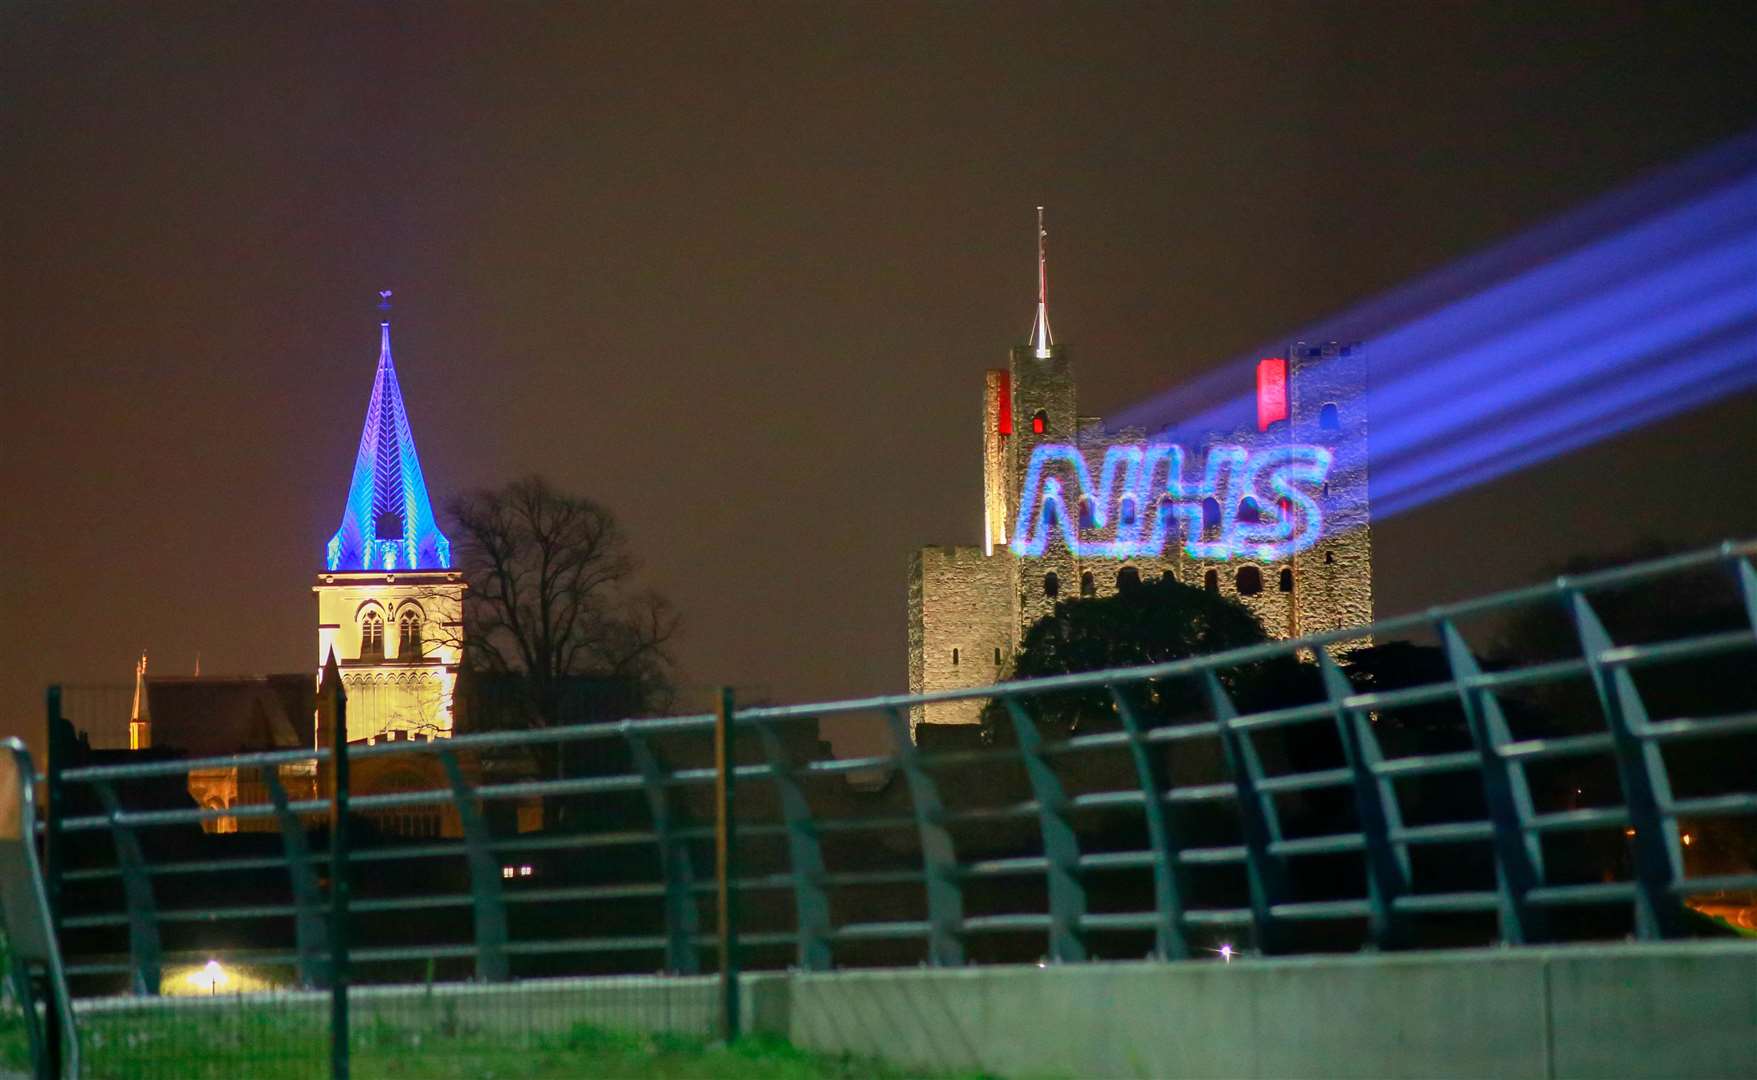 The NHS logo was beamed onto the side of Rochester Castle as the Cathedral next door was lit blue for the Clap for Carers.